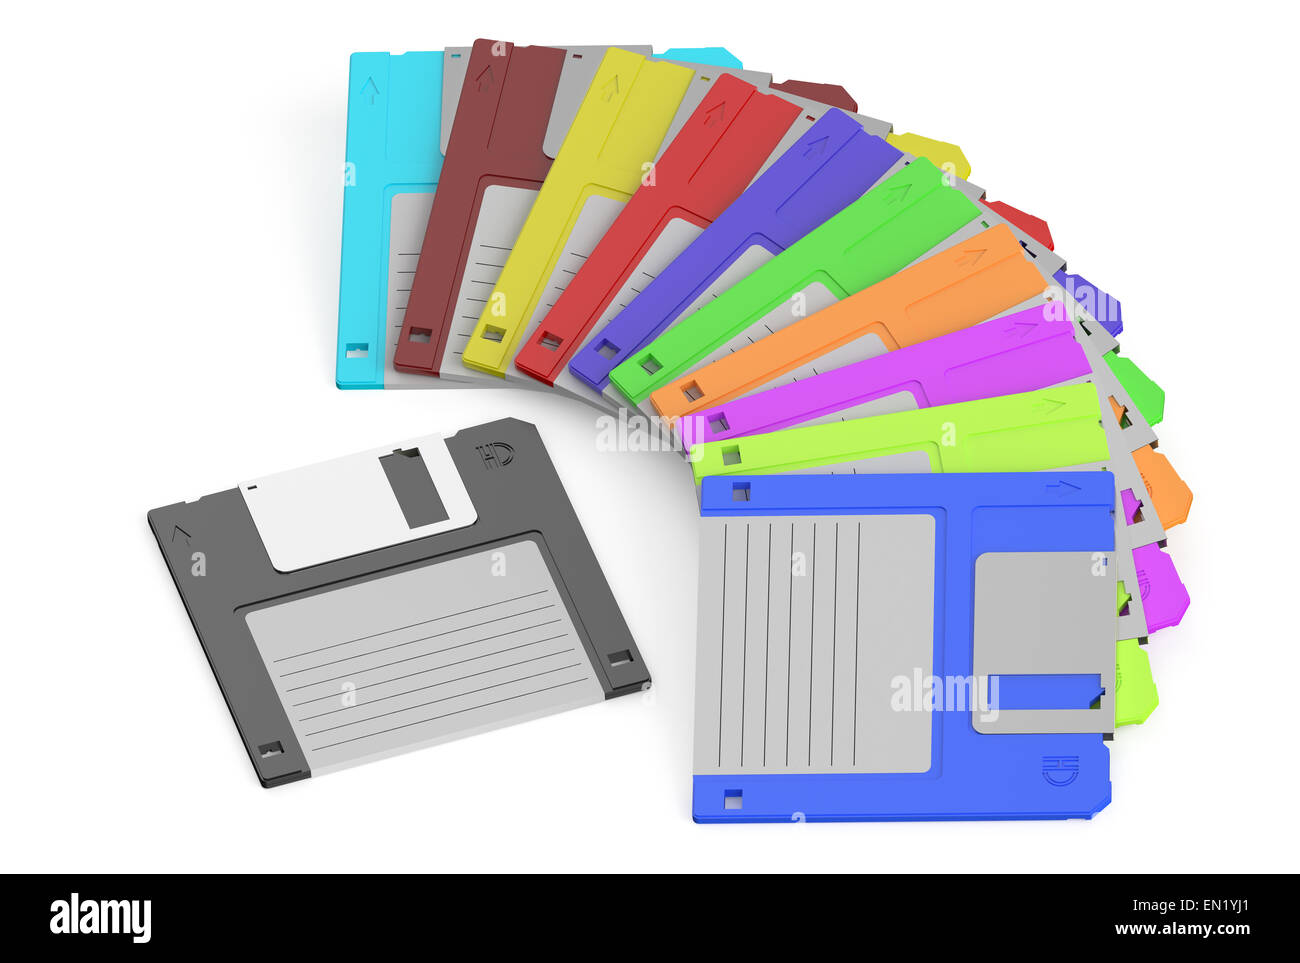 colored floppy disks isolated on white background Stock Photo